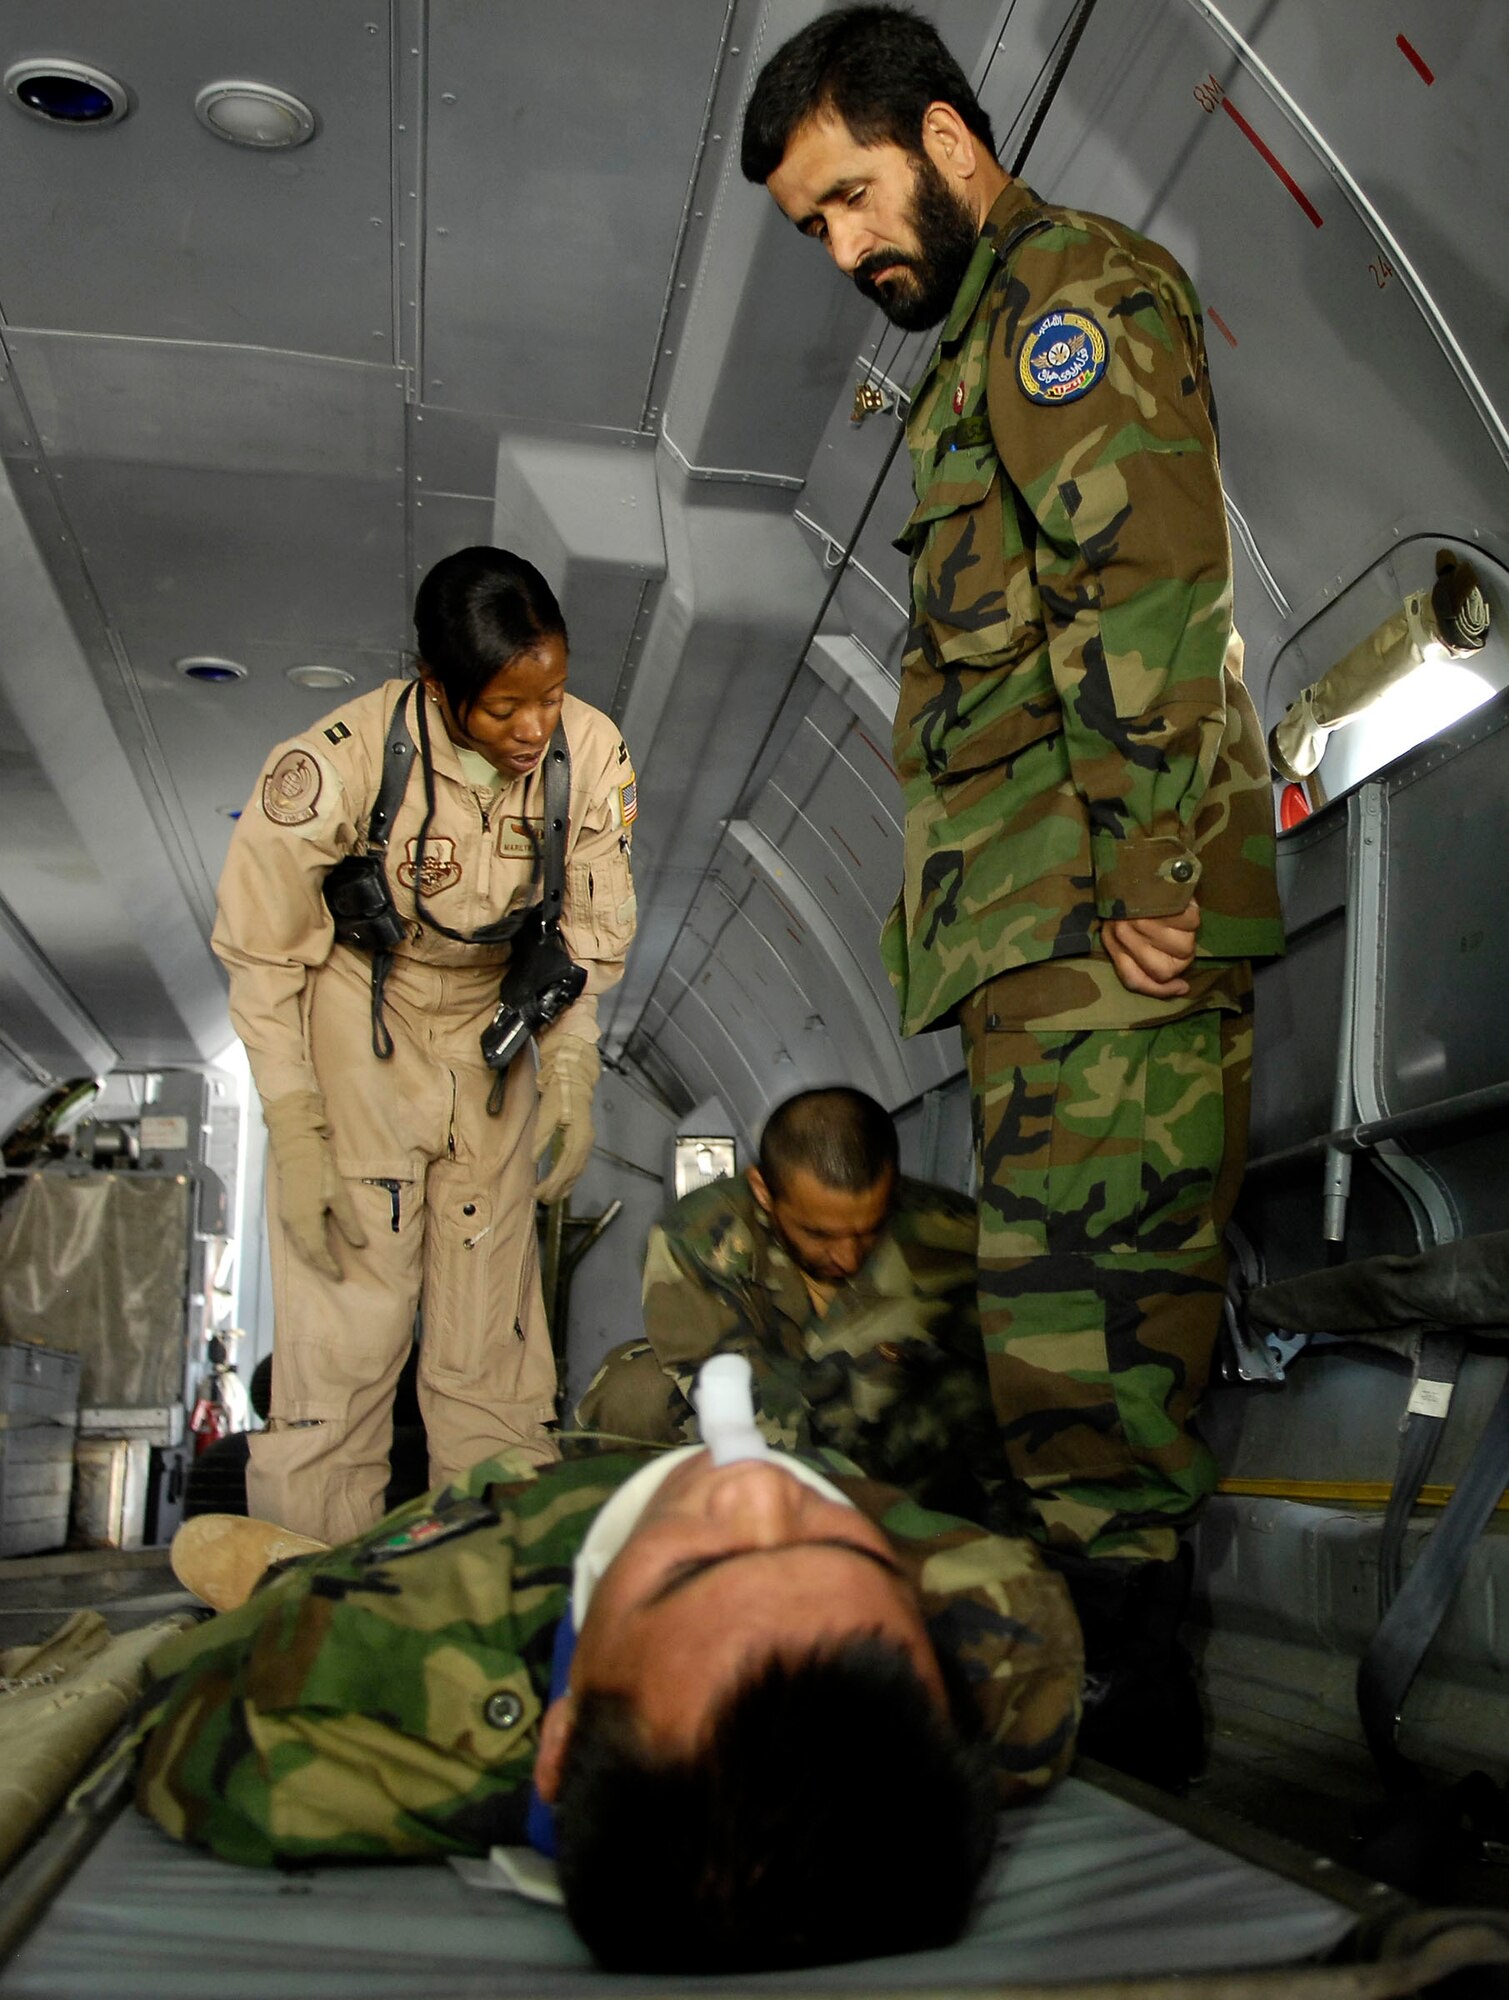 Capt. Marilyn Thomas observes a medical evacuation team as they floor load a patient onto an AN-32 cargo plane during a training exercise held at Kabul International Airport.  Captain Thomas is flight nurse and an Afghan National Army Air Corp medical mentor with the Air Corp Advisors Group here. She is deployed from Scott Air Force Base and her hometown is Beaver Creek, Ohio.    (U.S. Air Force photo/Staff Sgt. Brian Ferguson)